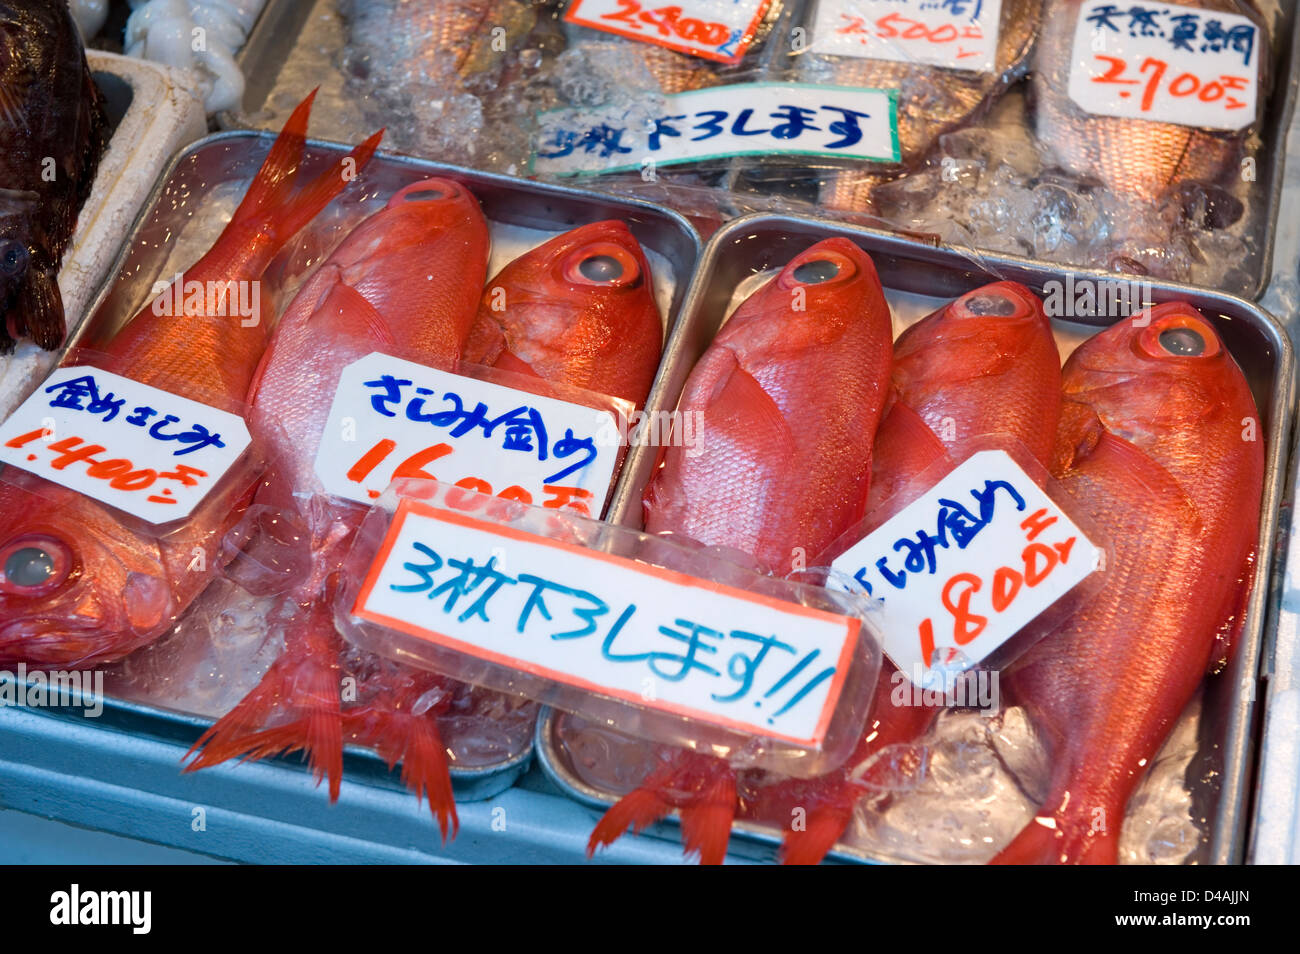 Red snapper for sale near Tsukiji Wholesale Fish Market, the world's largest fish market in Tokyo, Japan. Stock Photo